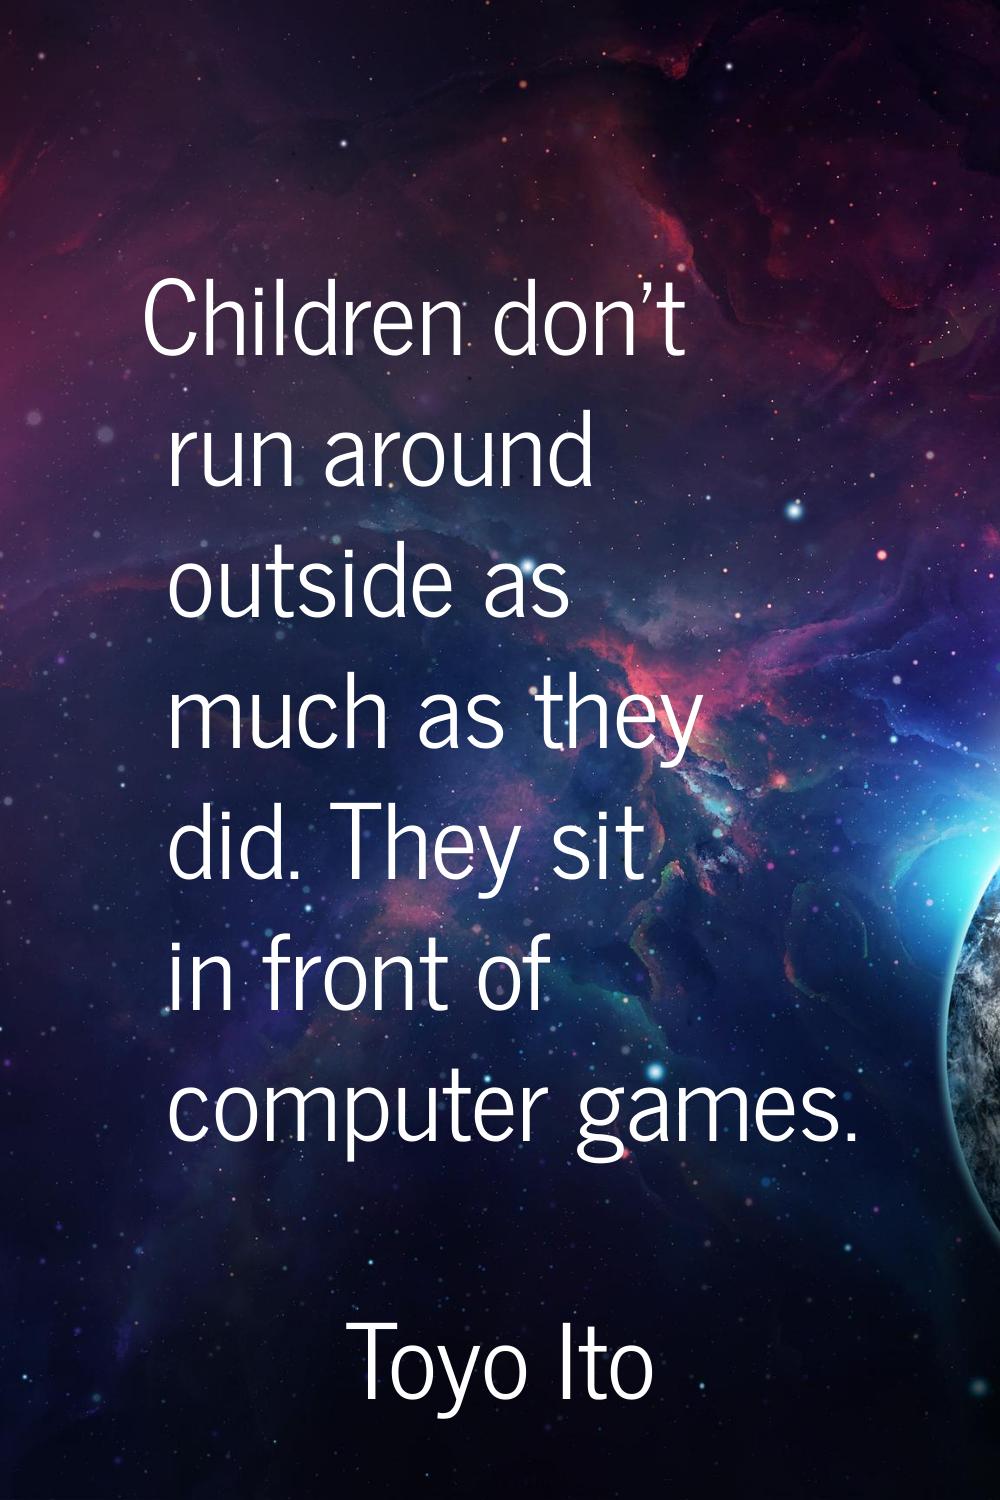 Children don't run around outside as much as they did. They sit in front of computer games.